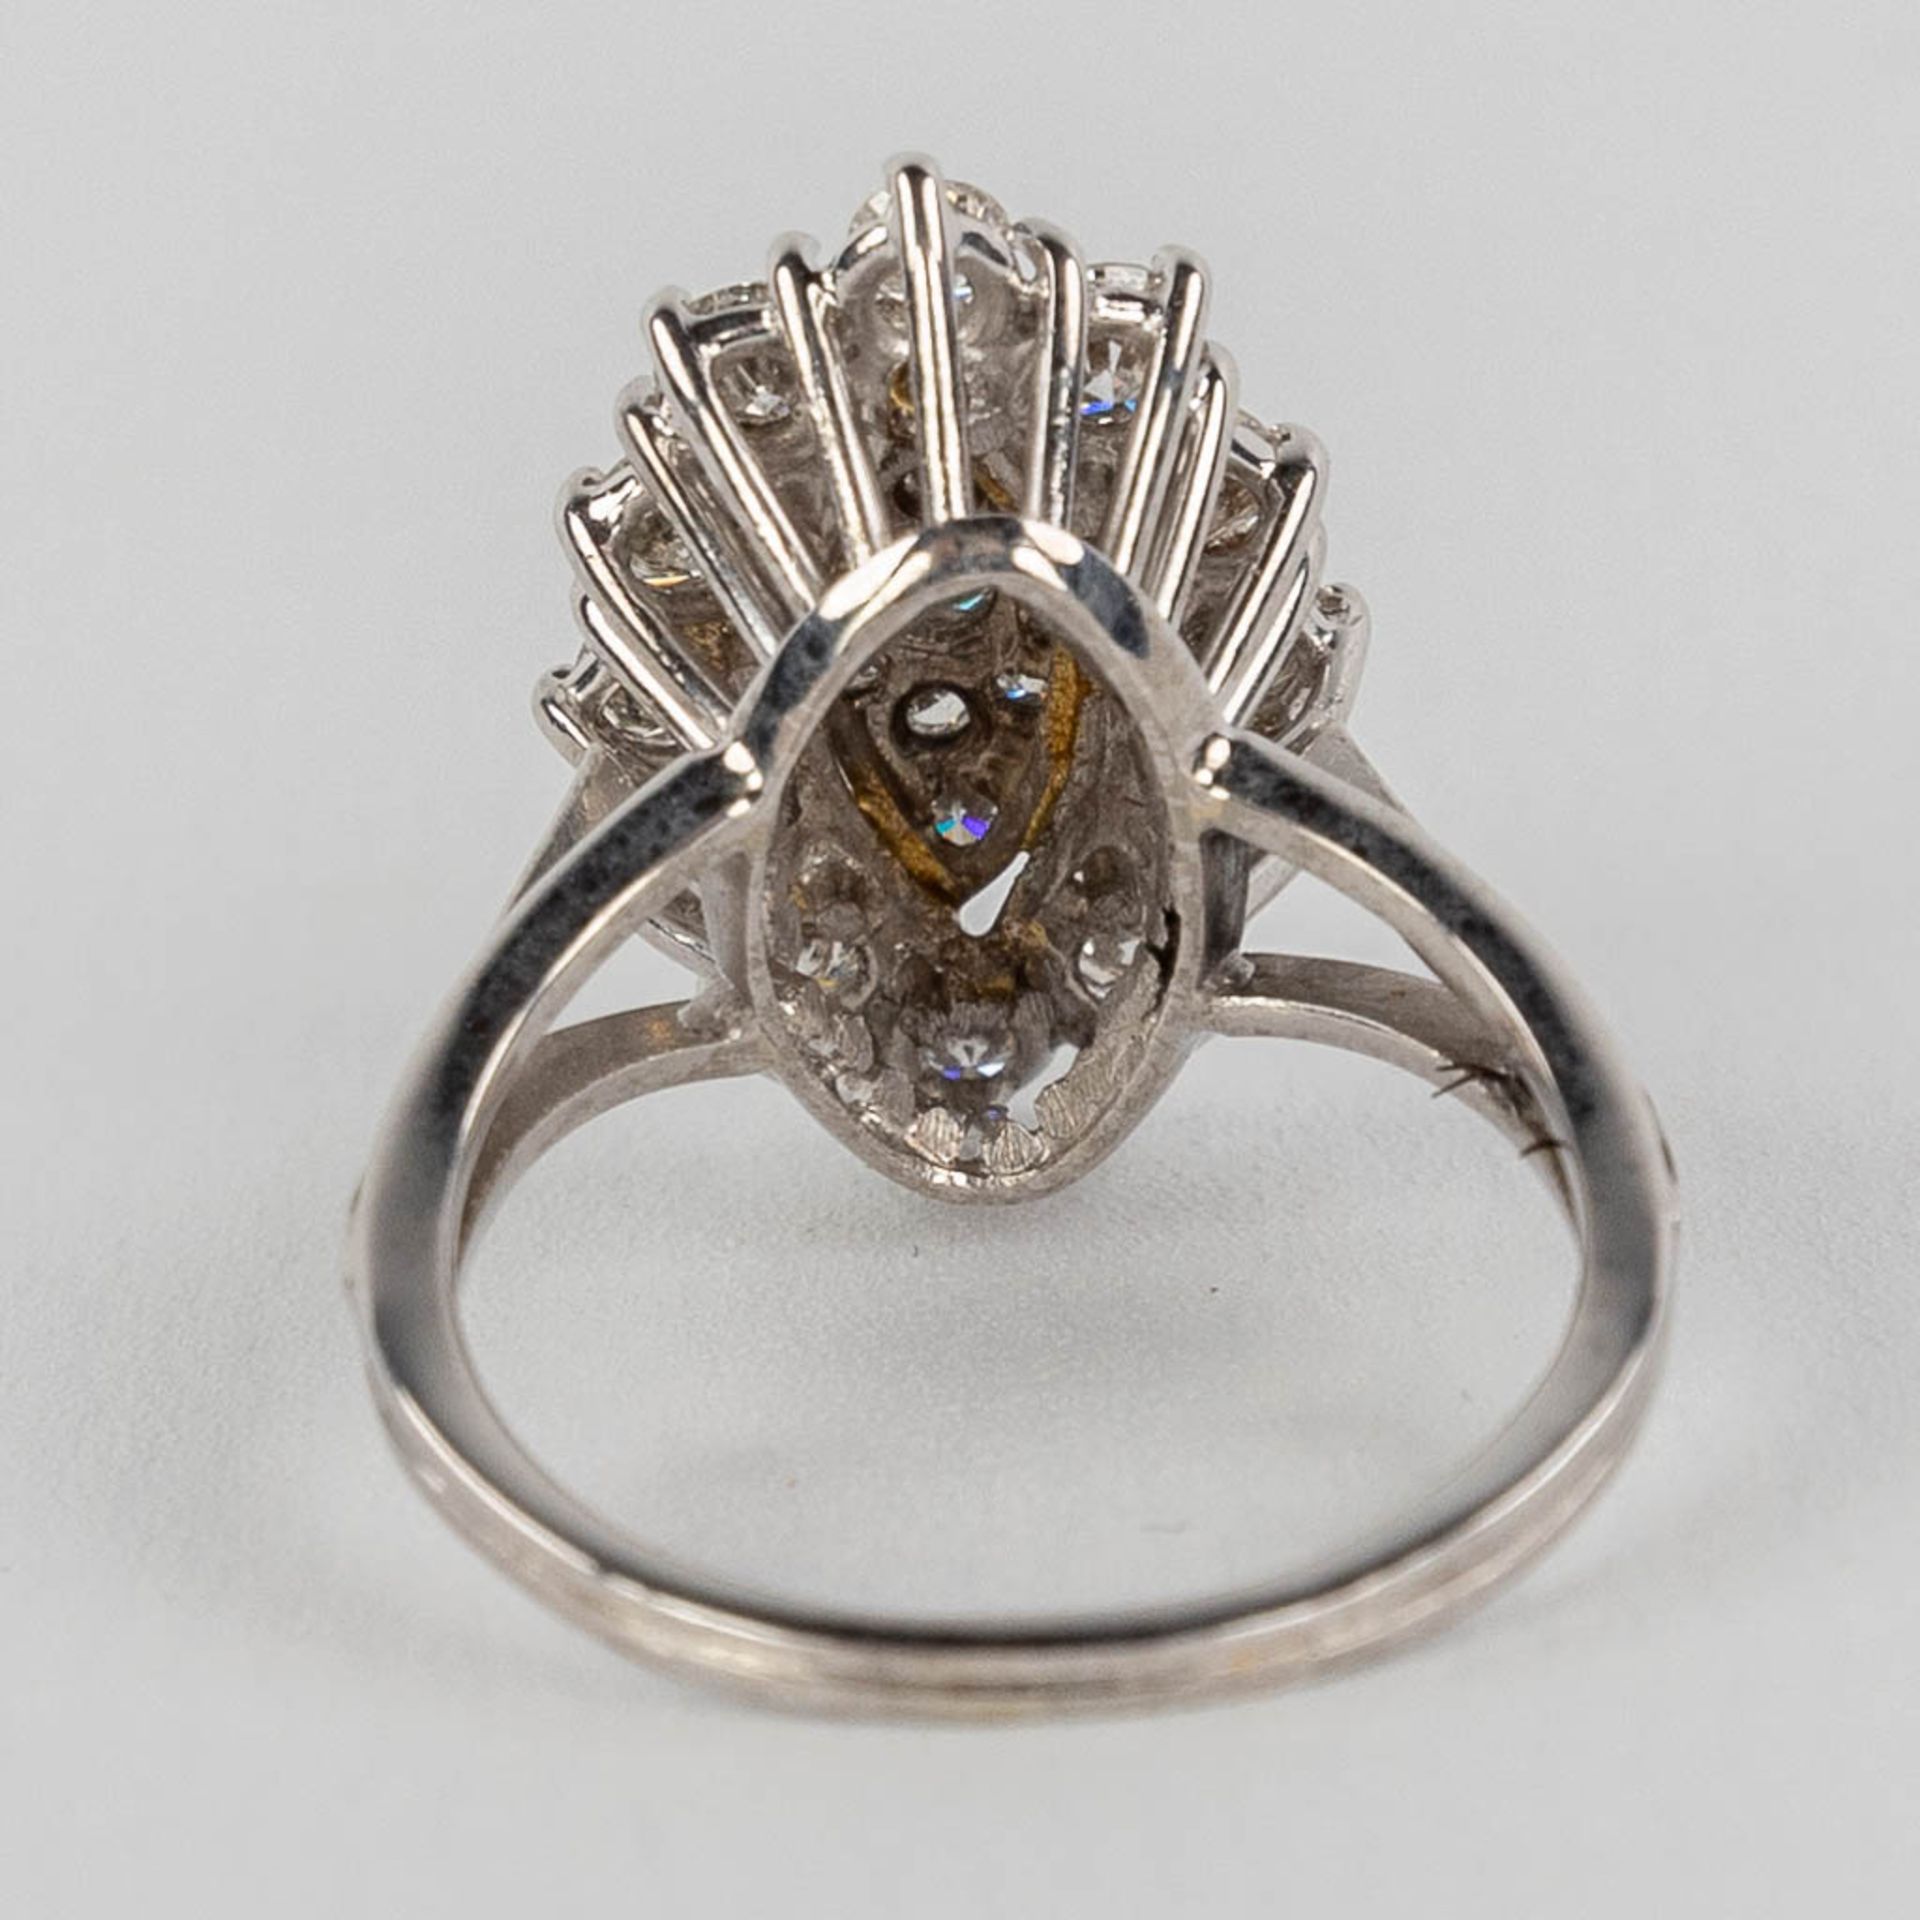 An 18-karat gold ring mounted with diamonds and brilliants. 20th C. 6,12g. size: 52. - Image 9 of 11